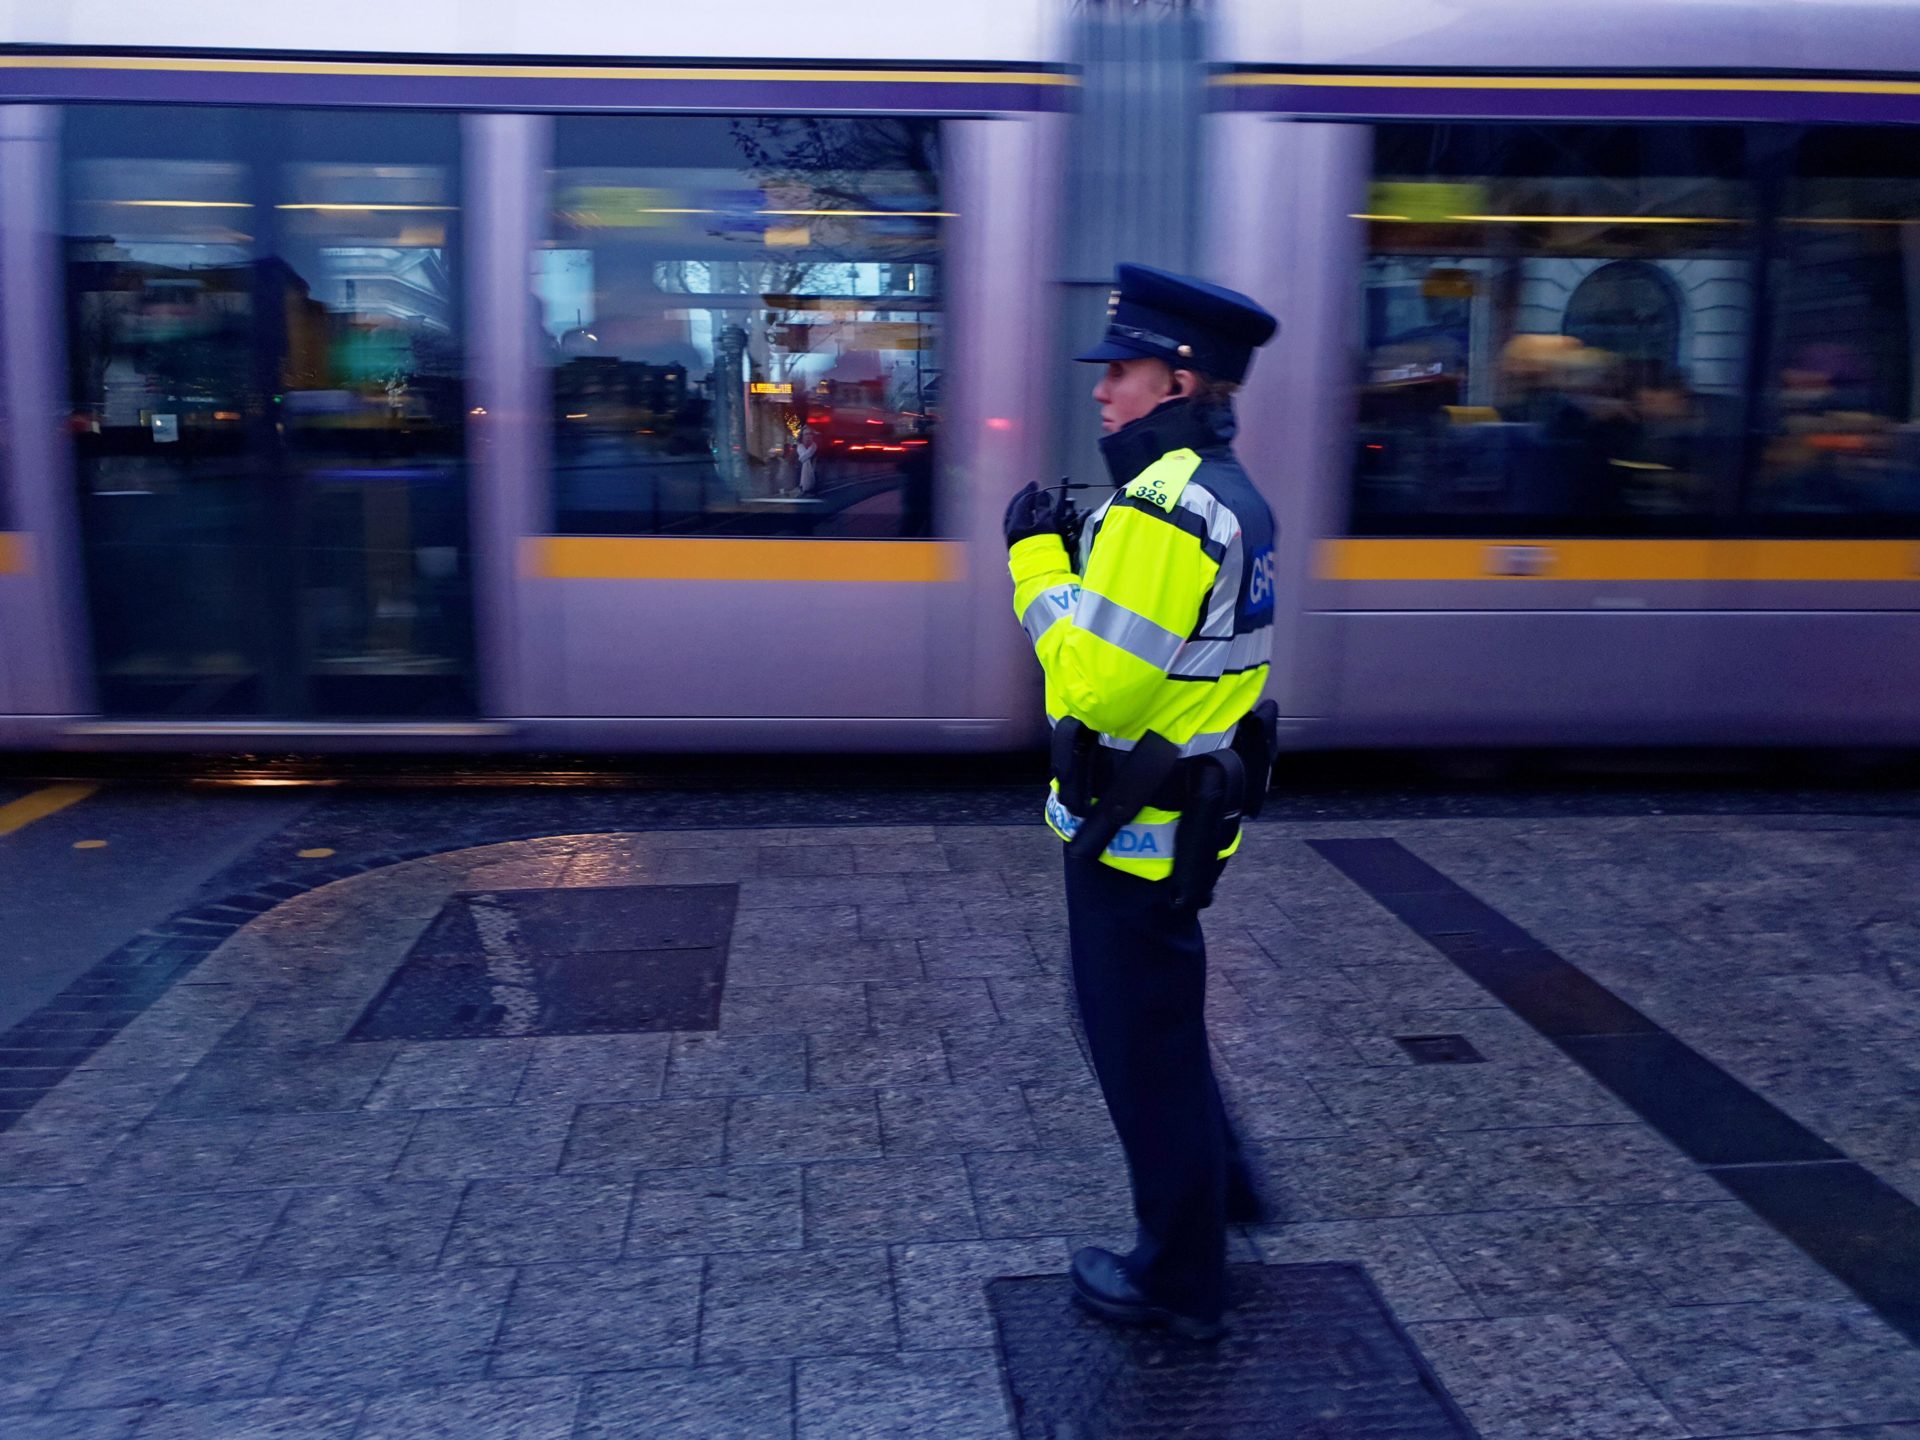 A Garda on duty in Dublin city centre, with a moving Luas in the background, in December 2019.